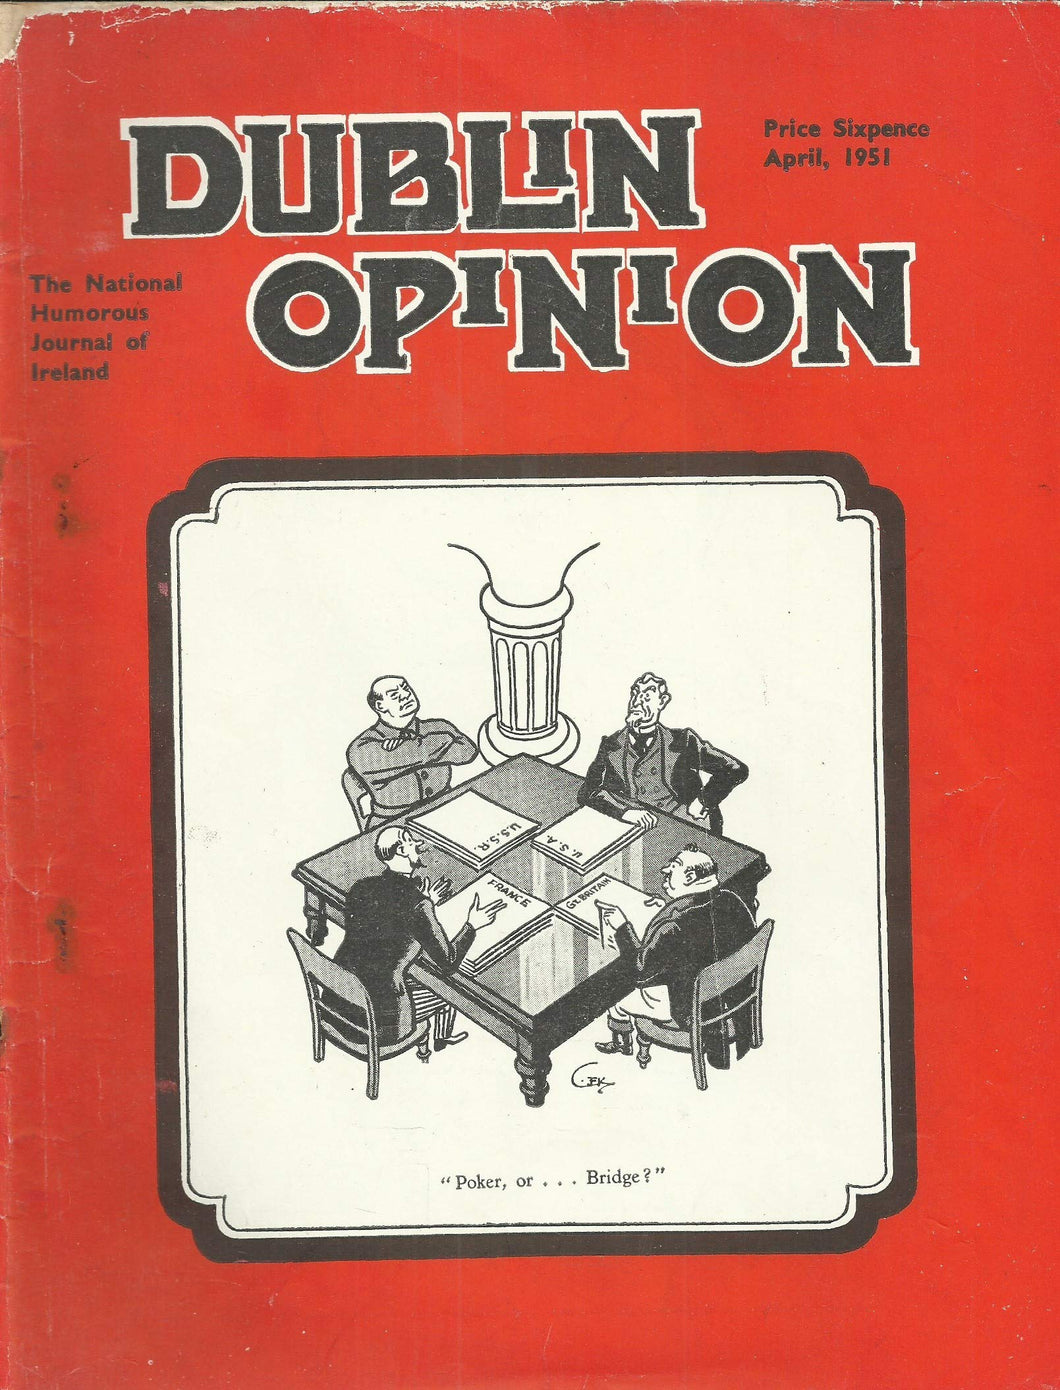 Dublin Opinion - April, 1951 - The National Humorous Journal of Ireland